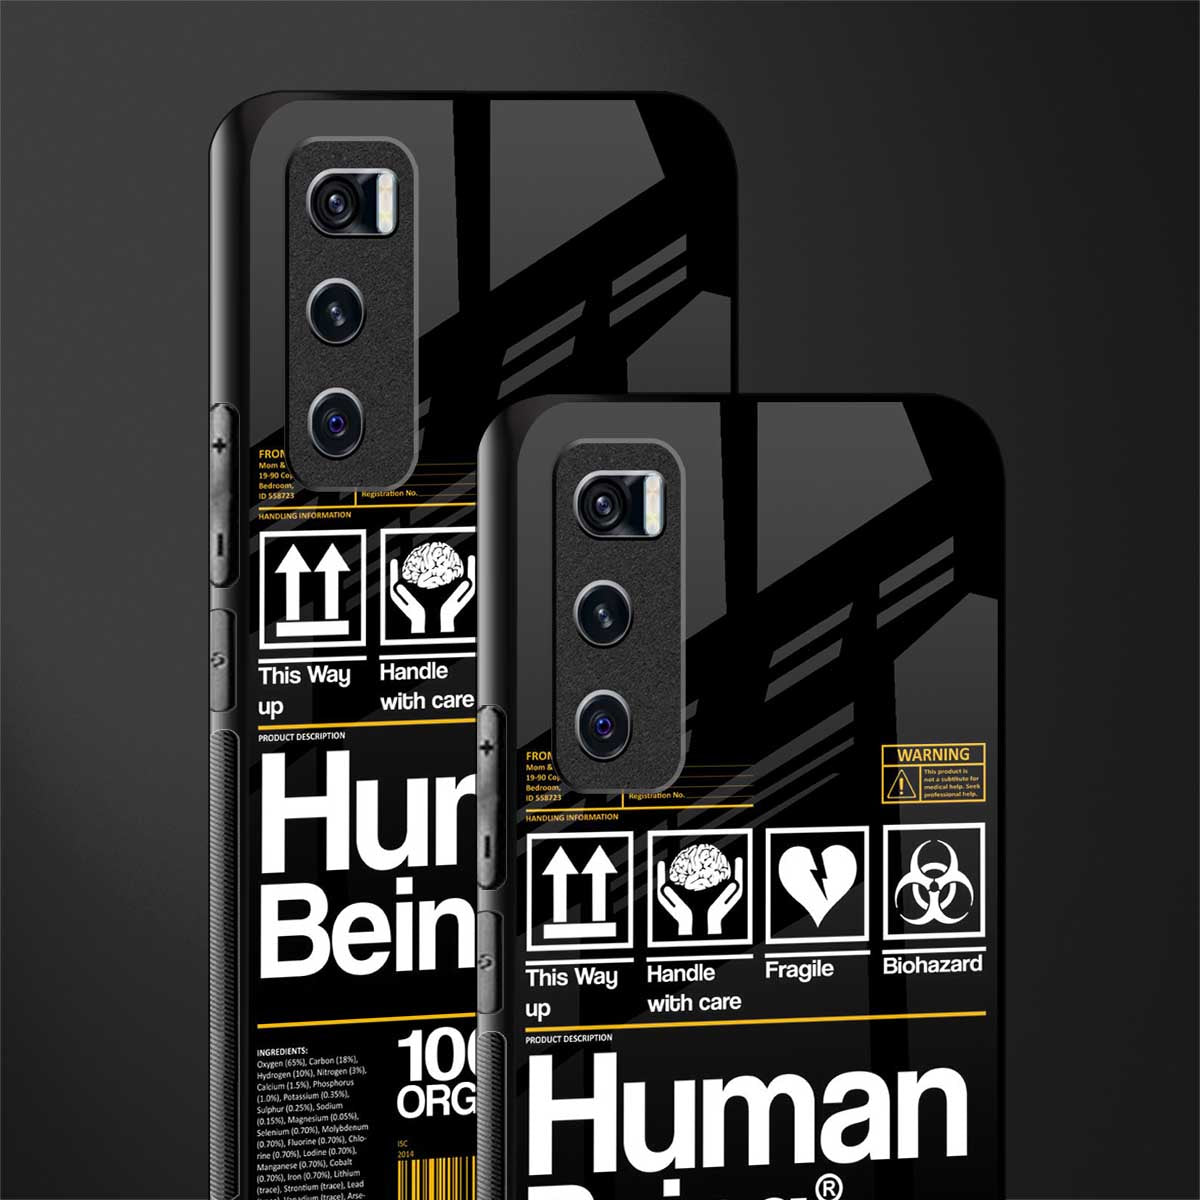 human being label phone cover for vivo v20 se